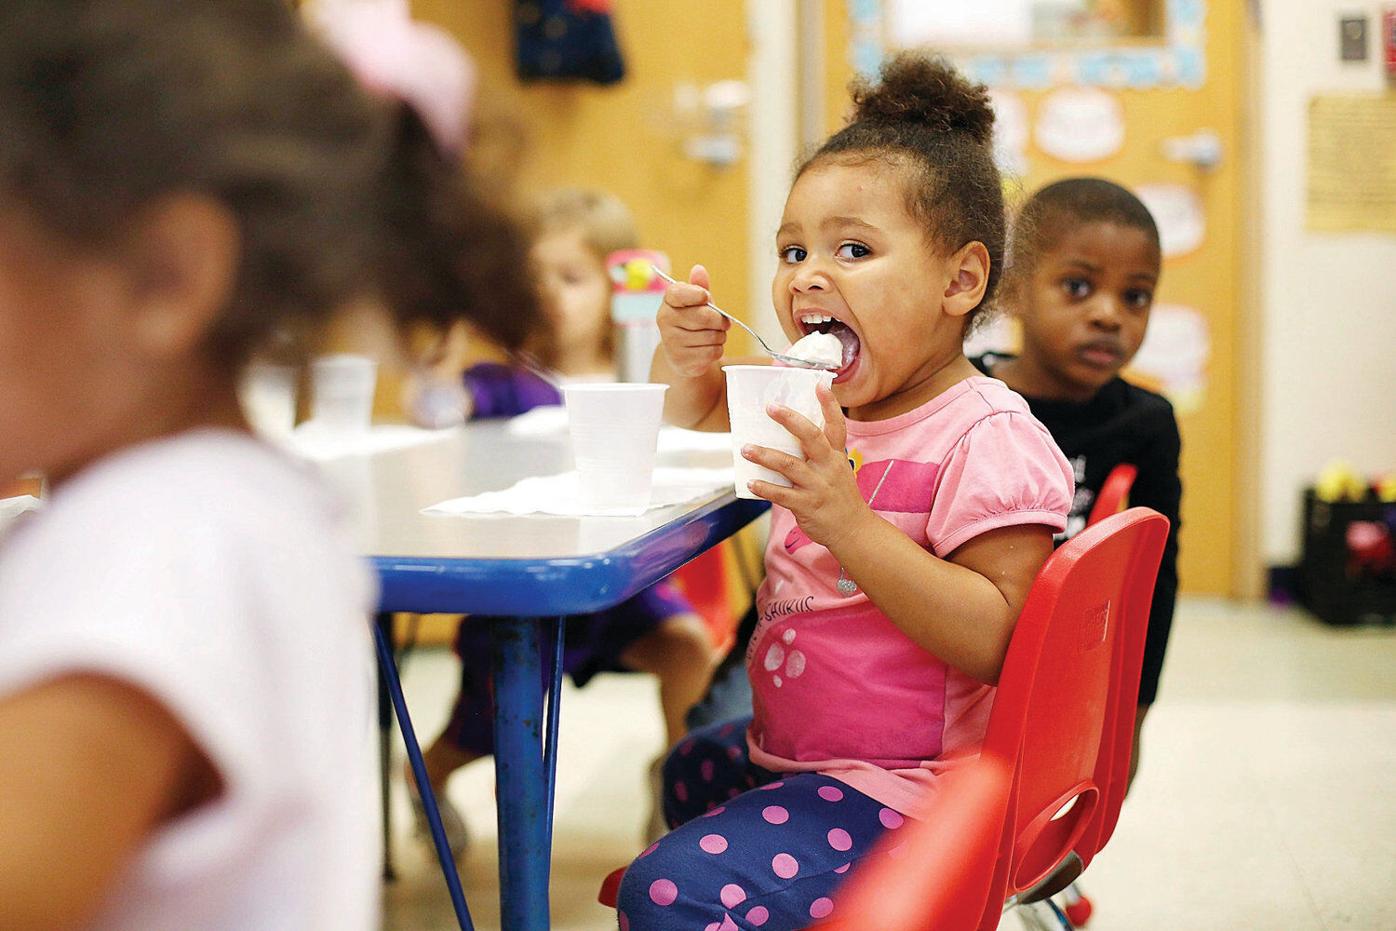 How to get the equation right on early education funding?